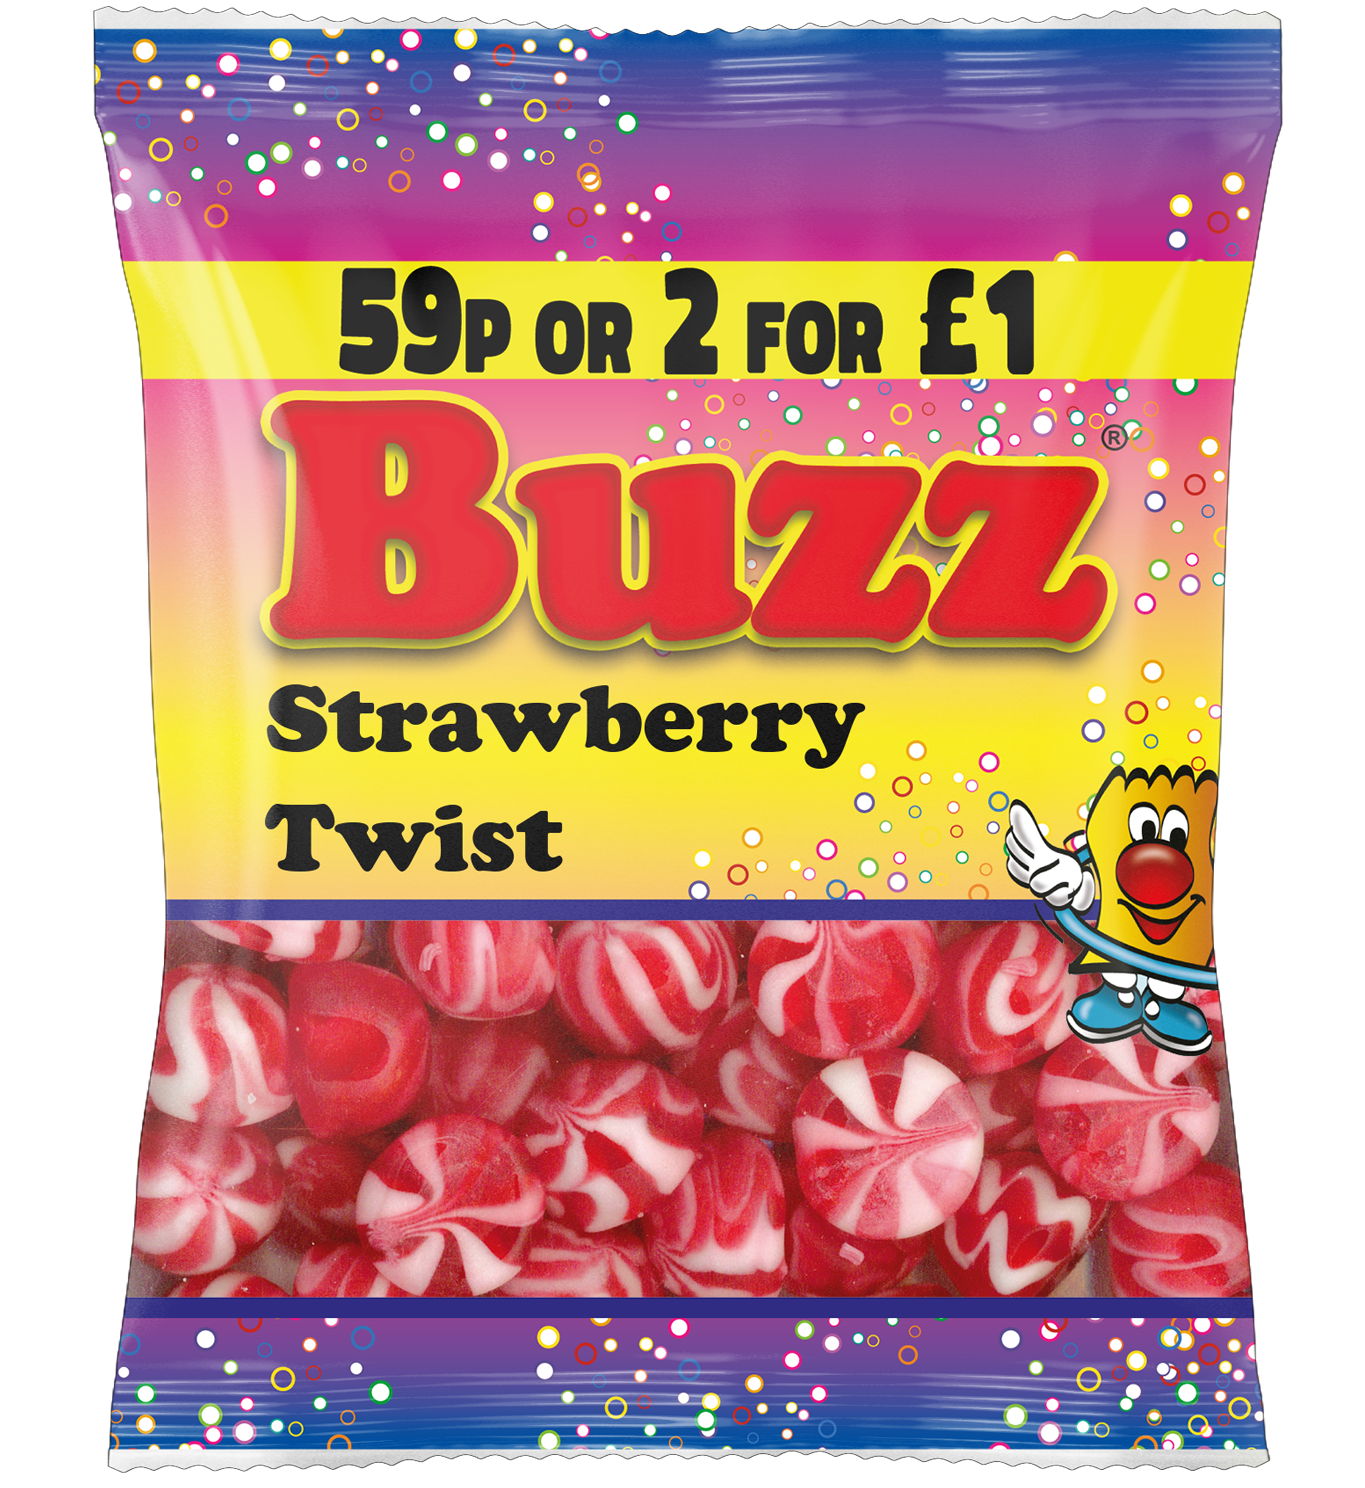 Packet of 59p Strawberry Twist Sweets by Buzz Sweets. Sold as 59p or 2 for £1.